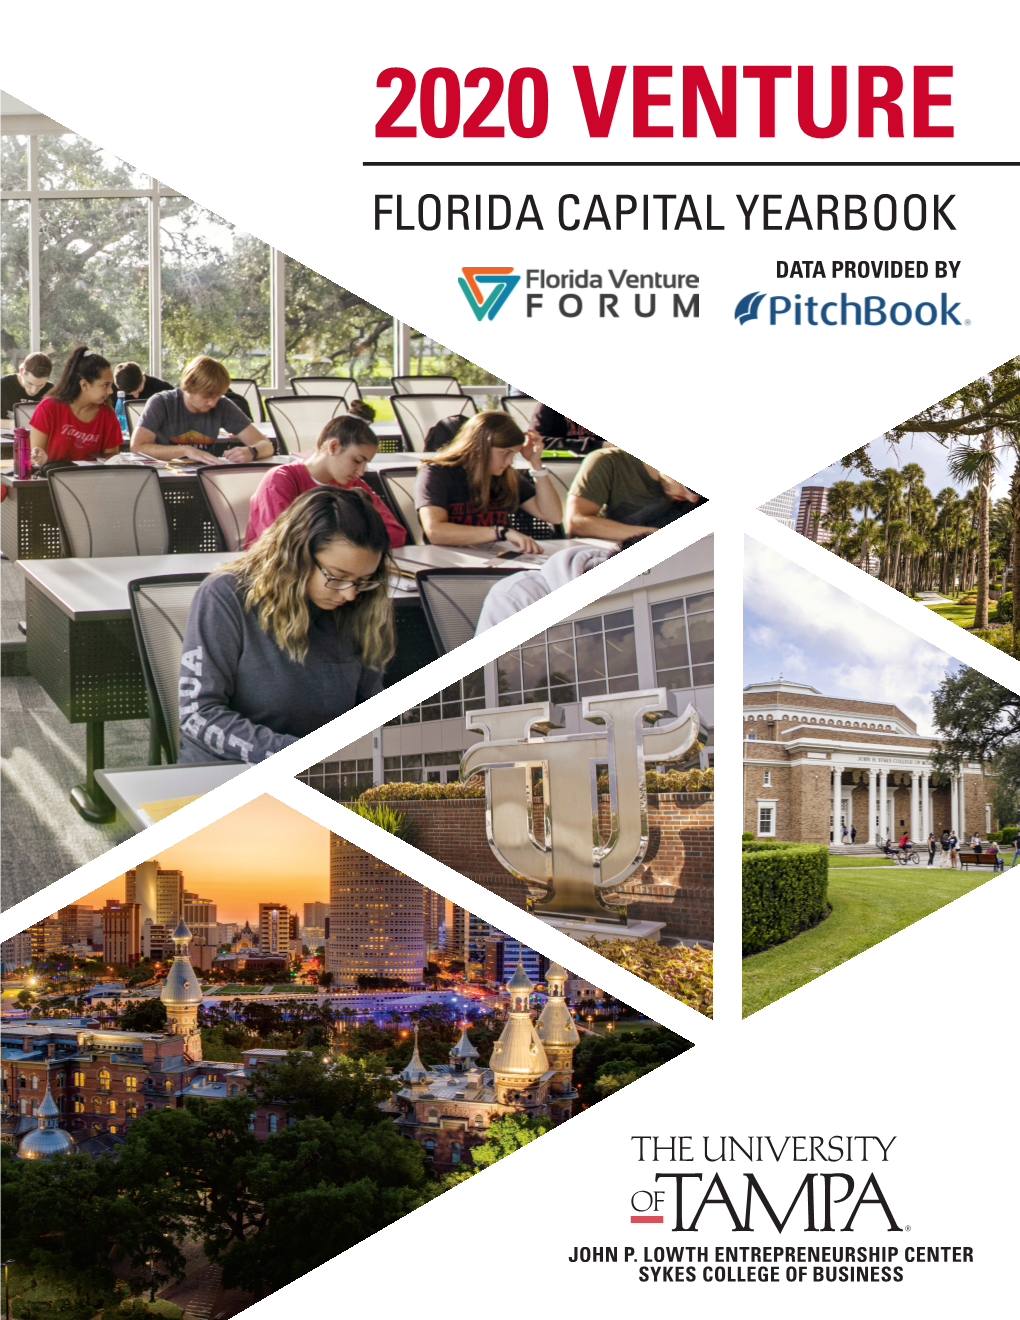 2020 Florida Venture Capital Yearbook Provides Venture Capital Data for Funds and Venture-Backed Companies Headquartered in Florida